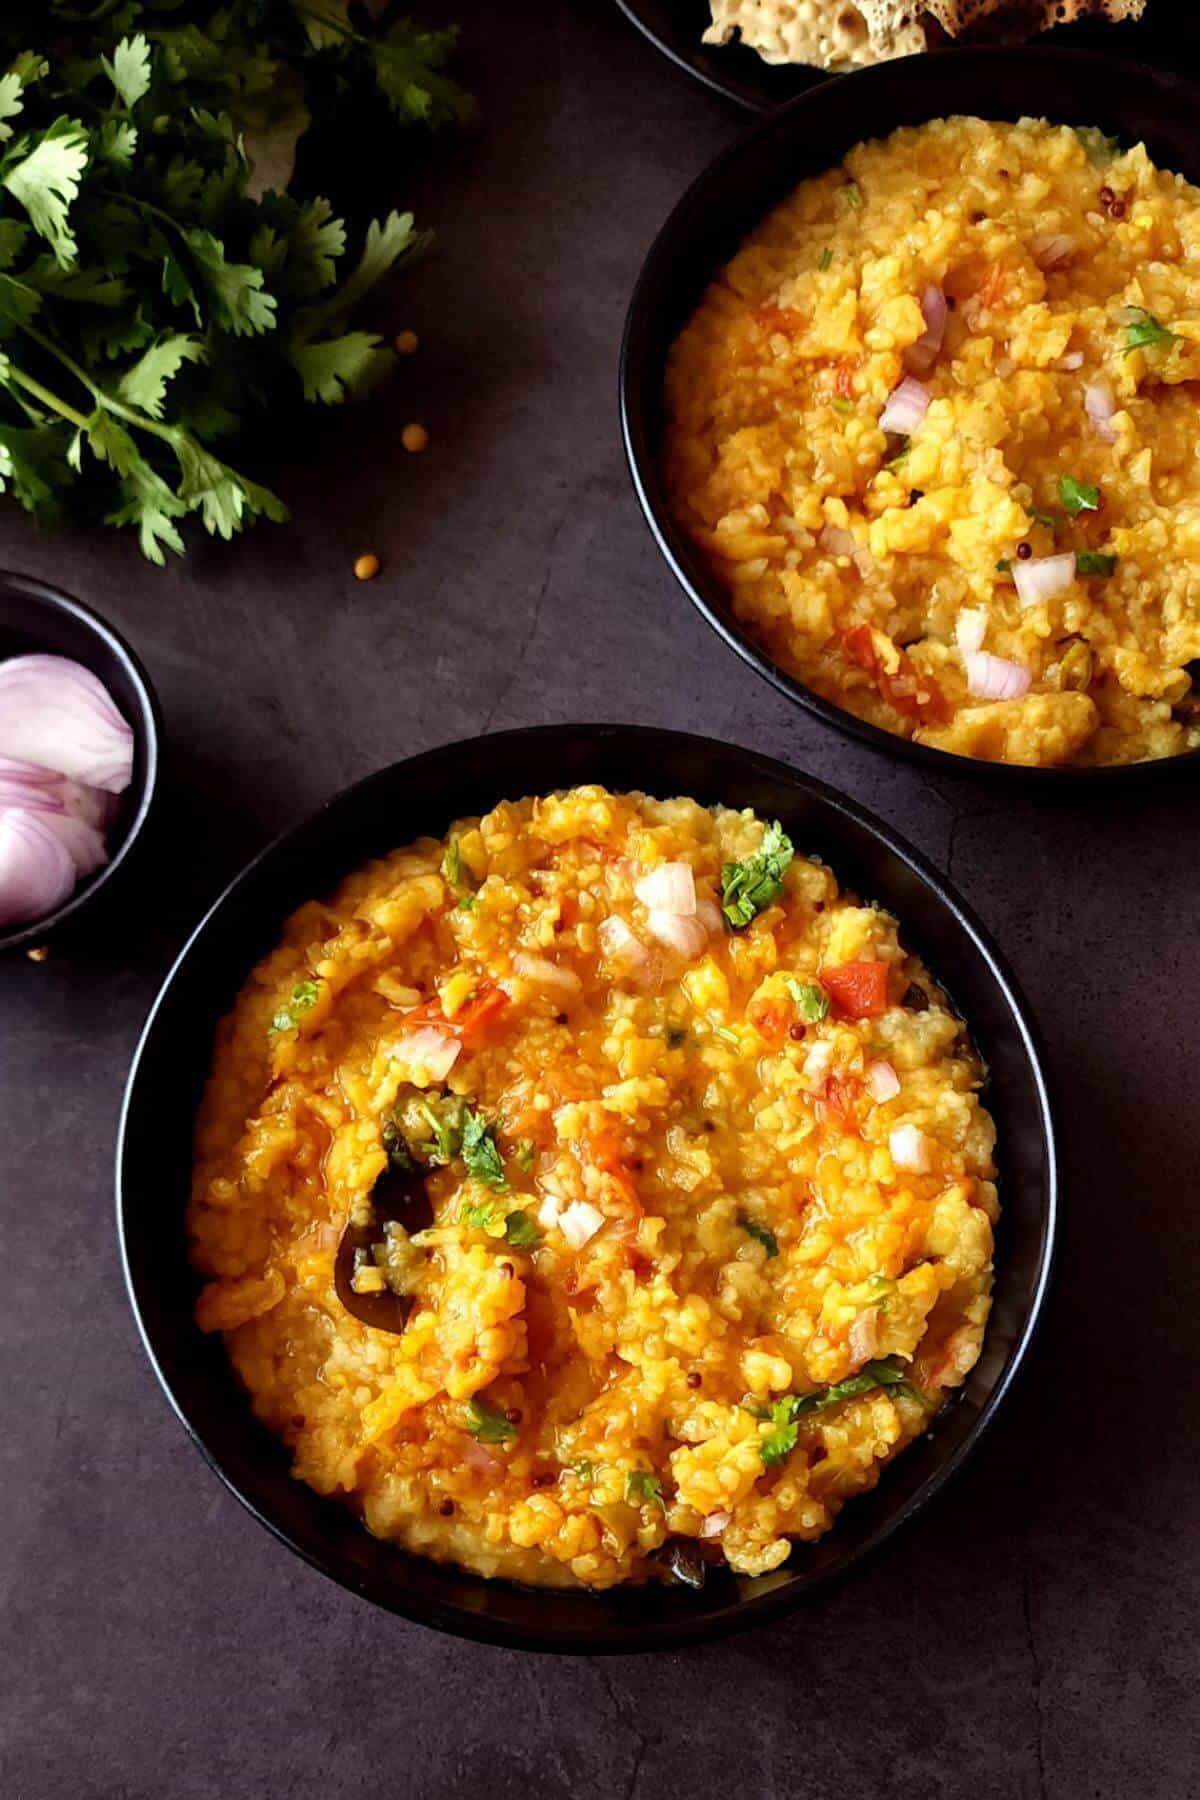 Two bowls of arhar dal khichdi with sliced onion and fresh herbs on the side.